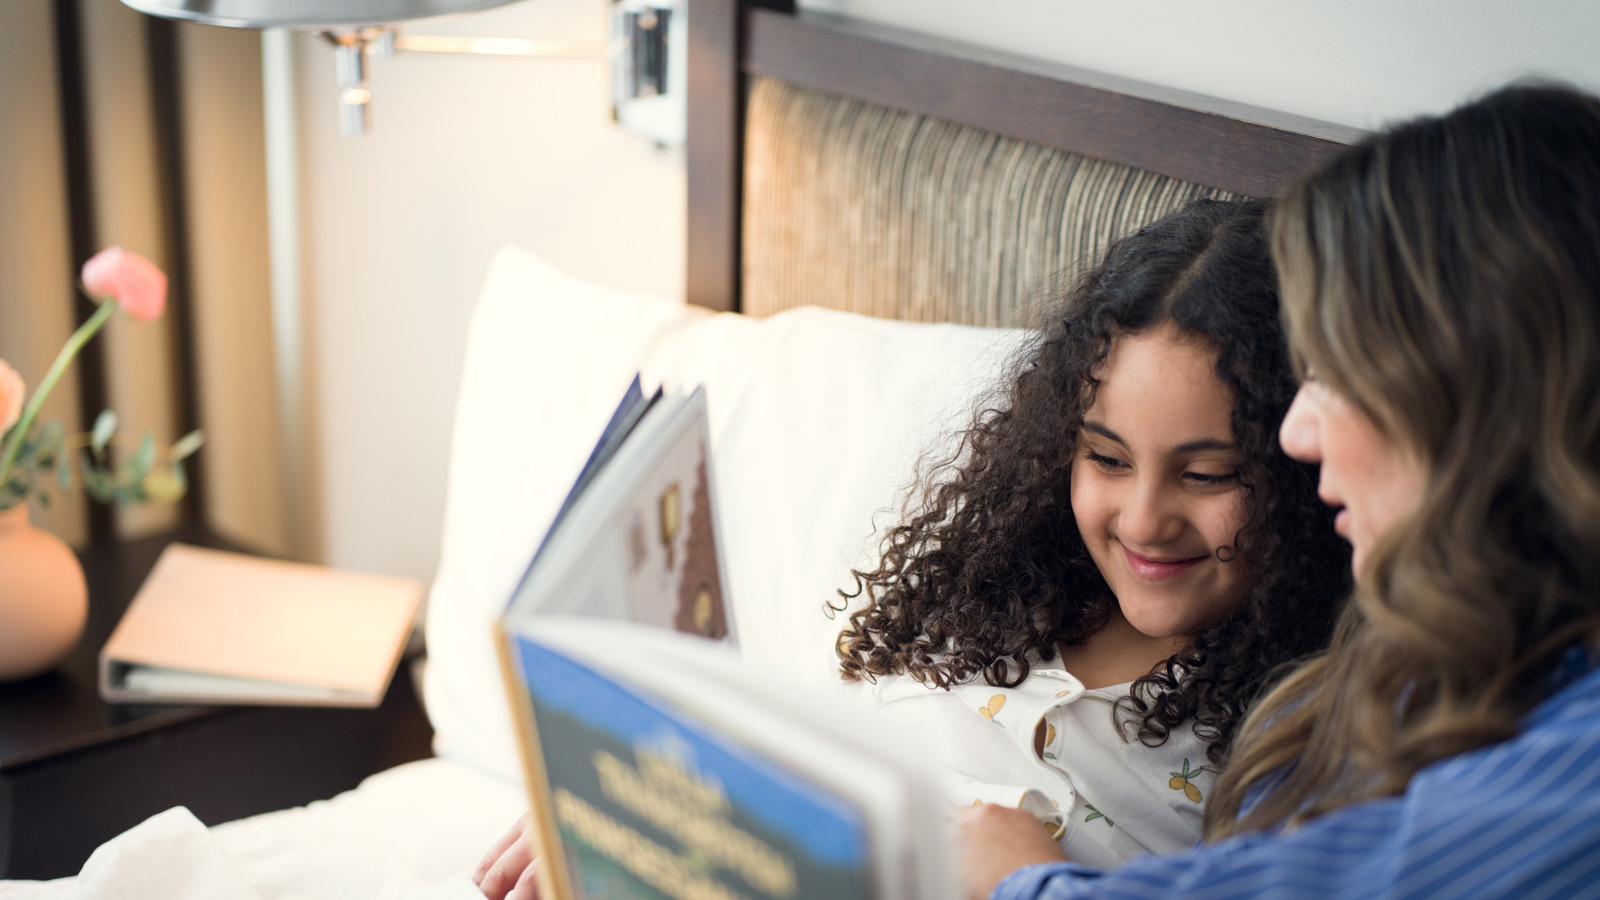 A family together on a hotel bed reading a book